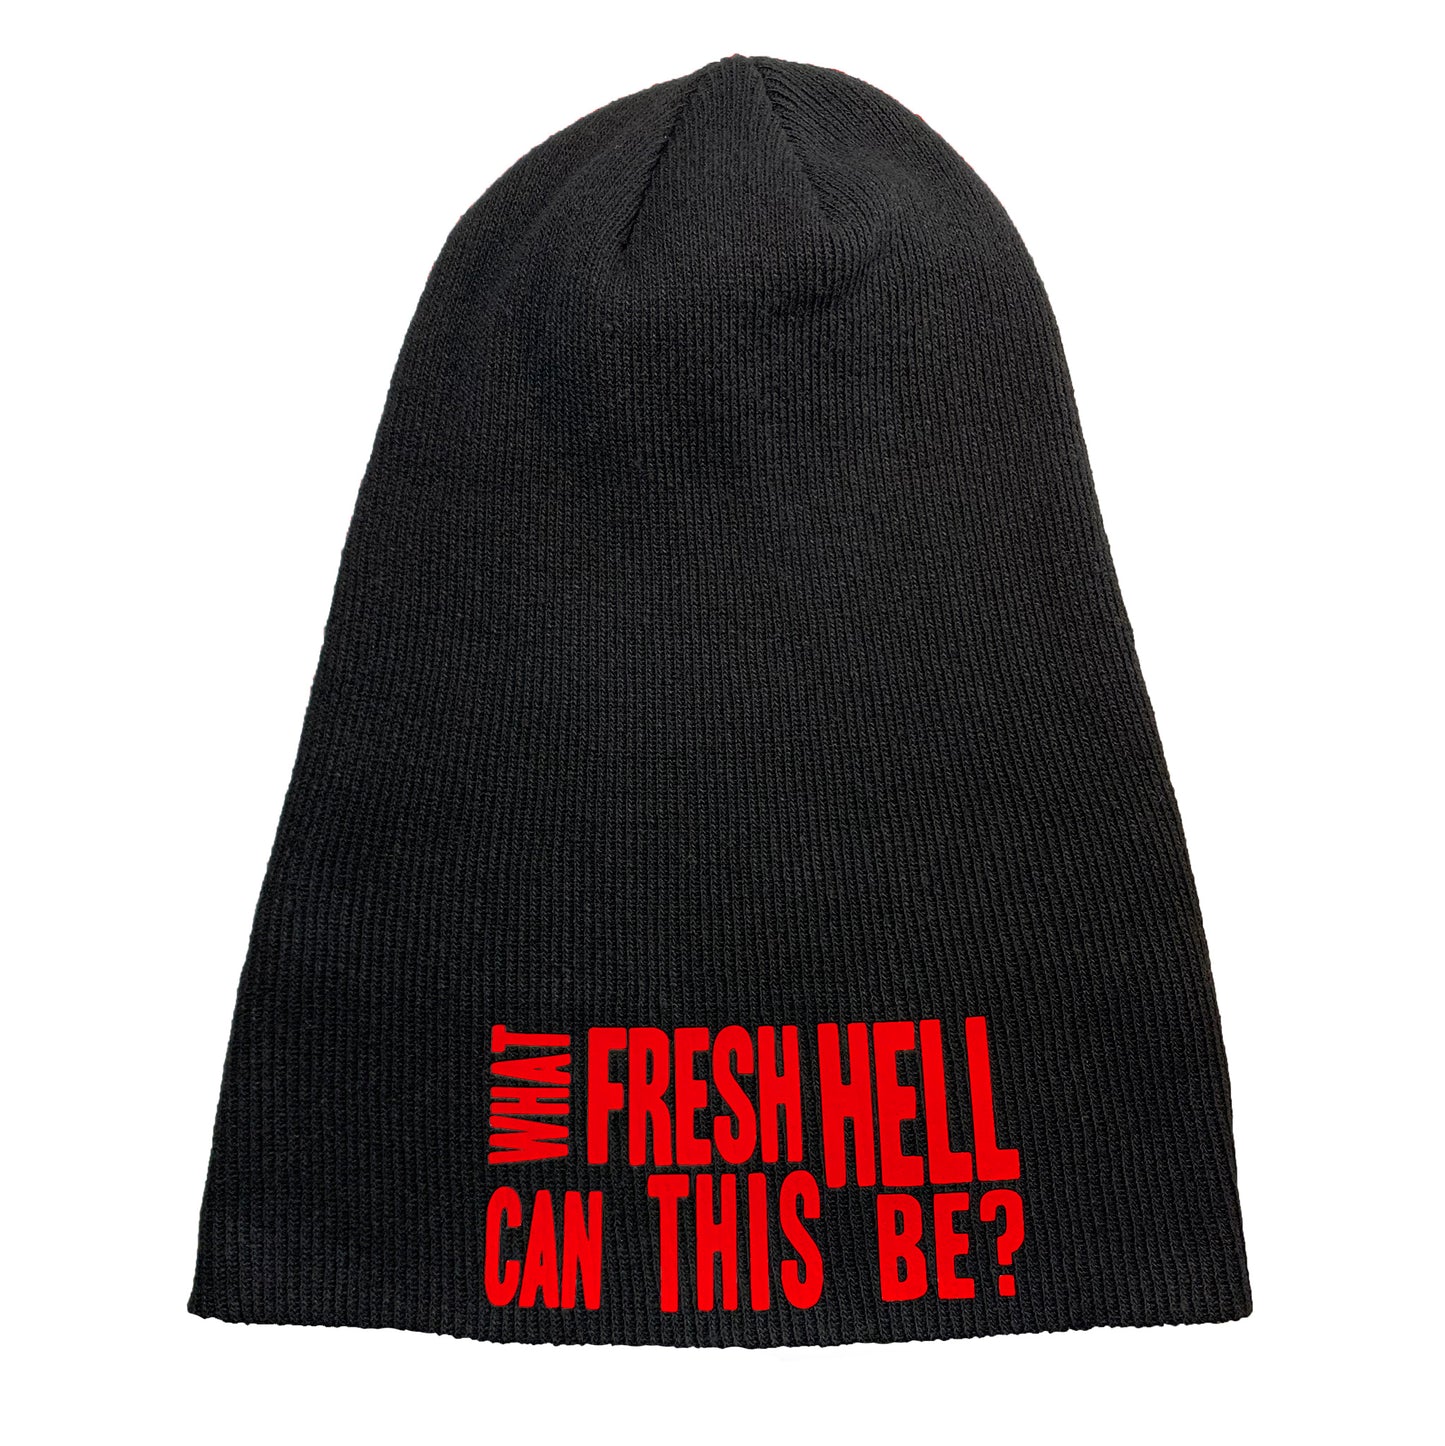 black toque beanie hat, long/uncuffed, text graphic "What Fresh Hell Can This Be?" in matte red